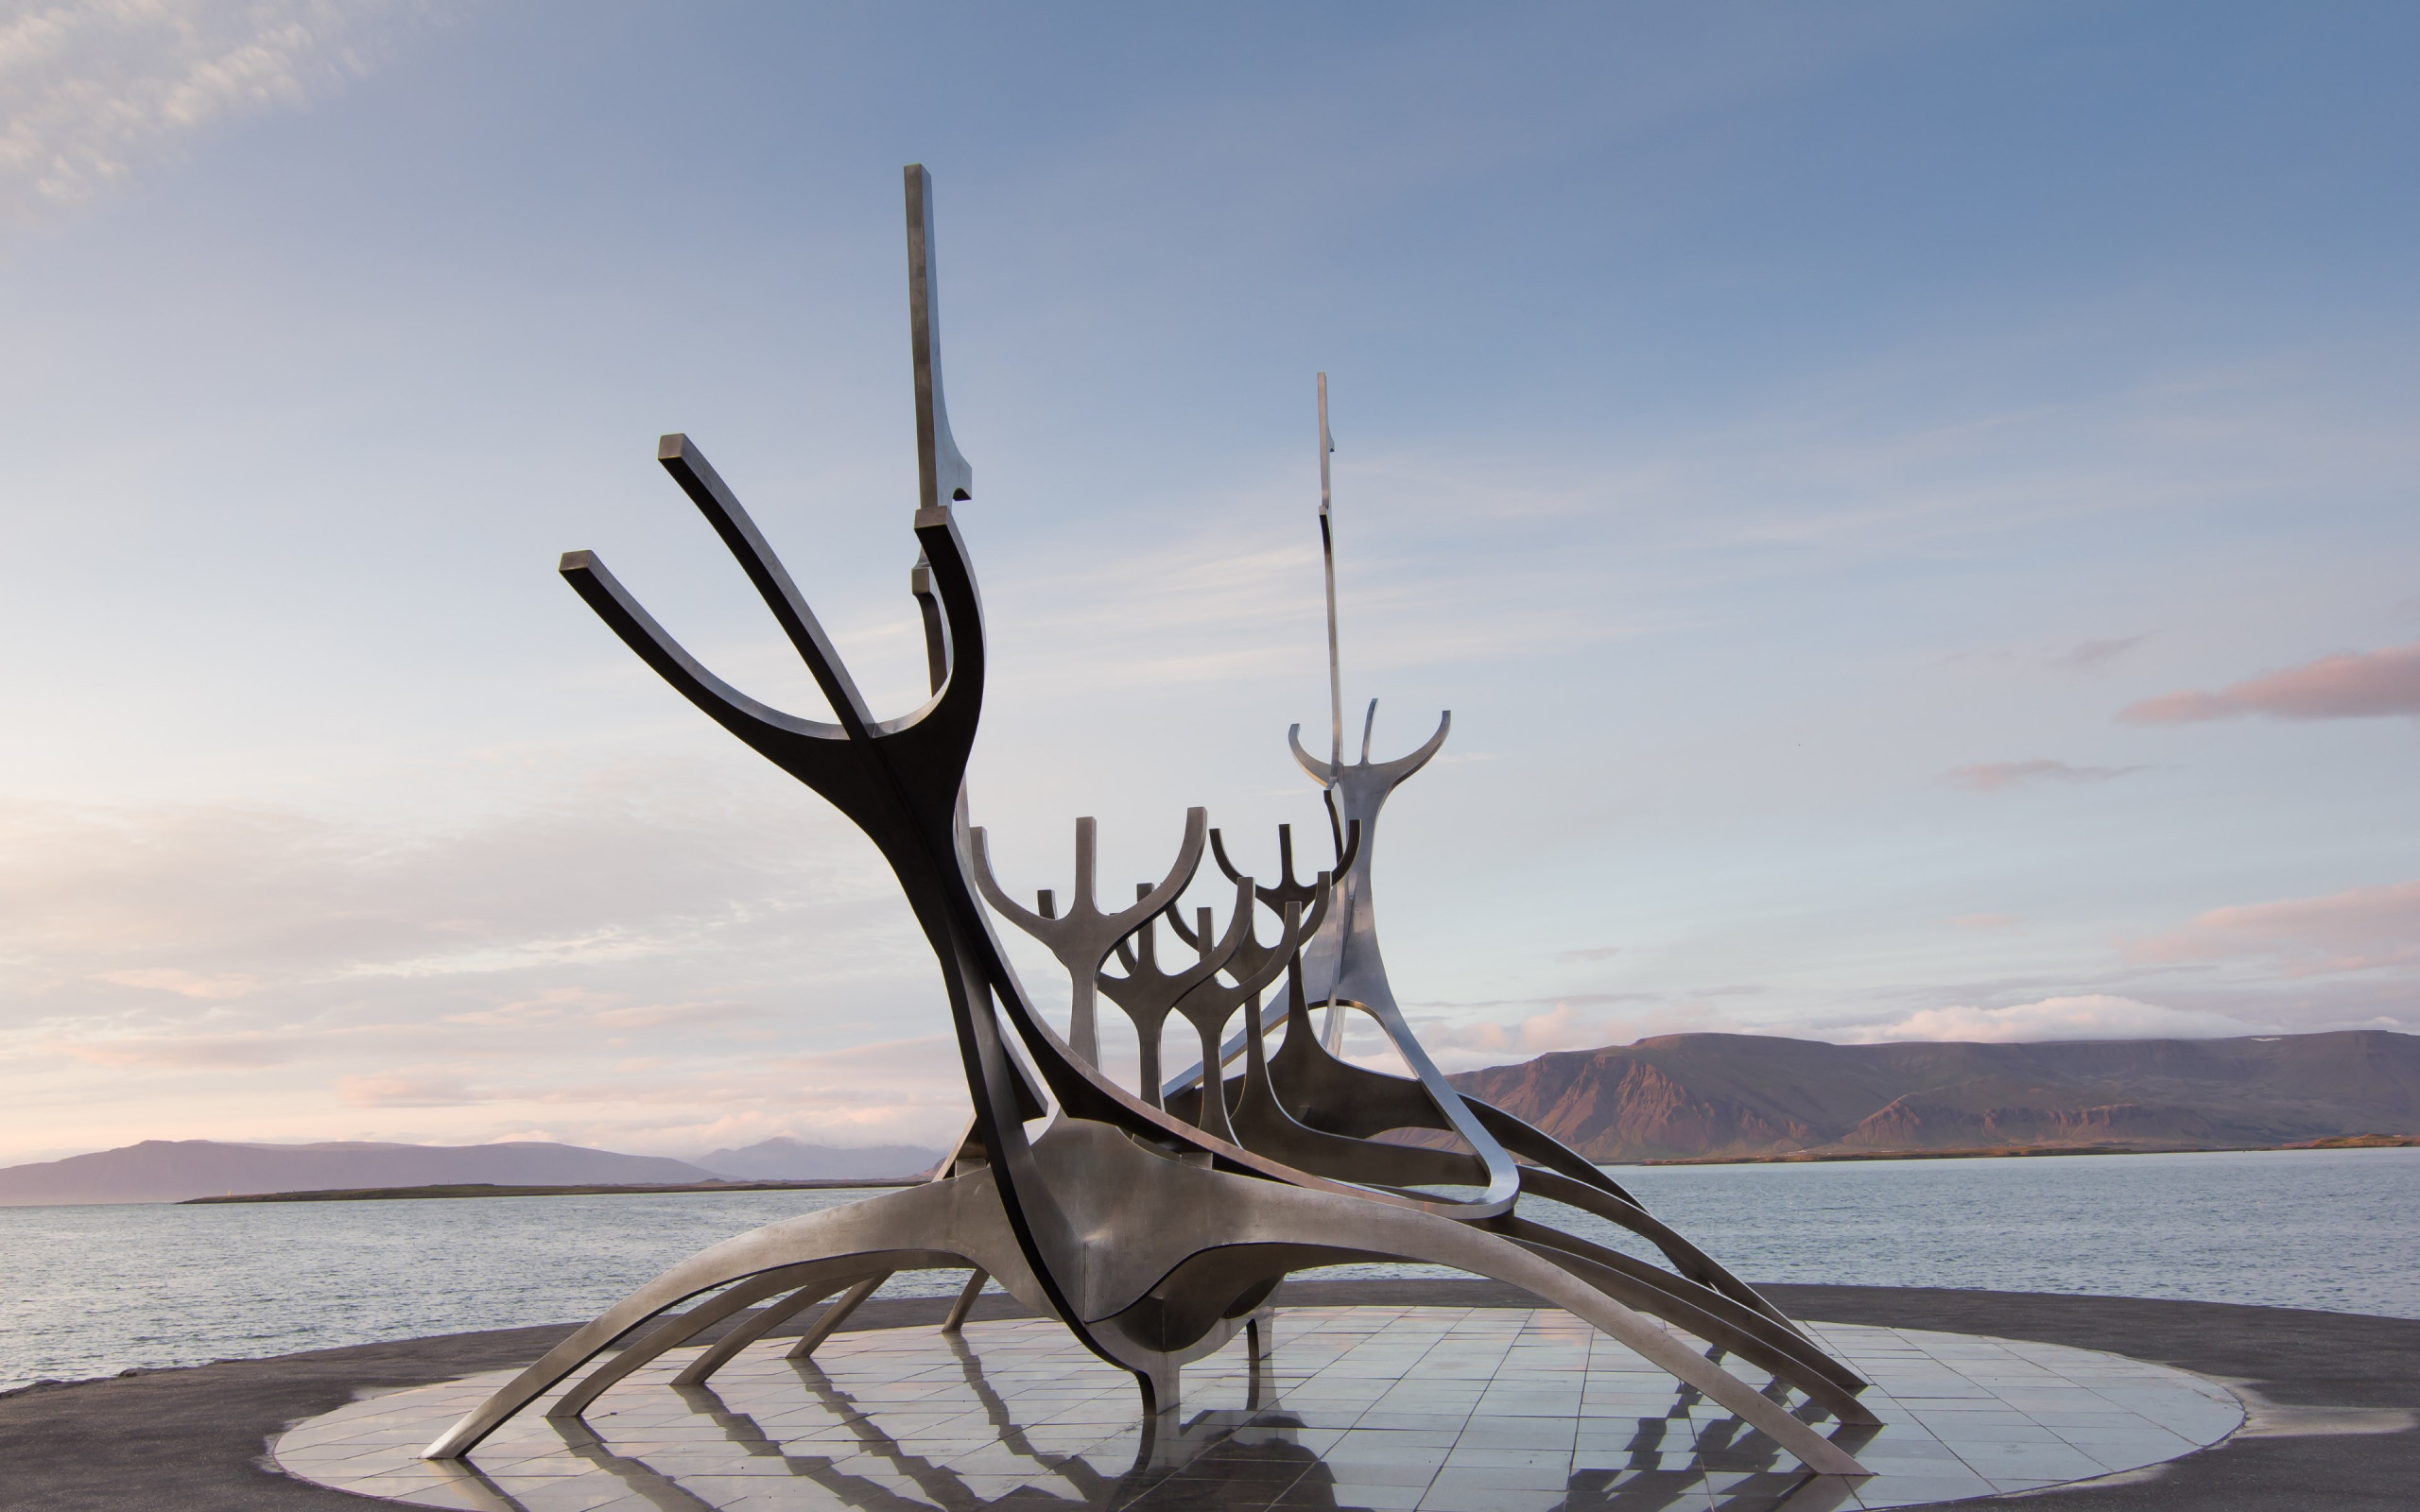 The Sun Voyager from Reykjavik, Iceland wallpaper 2560x1600